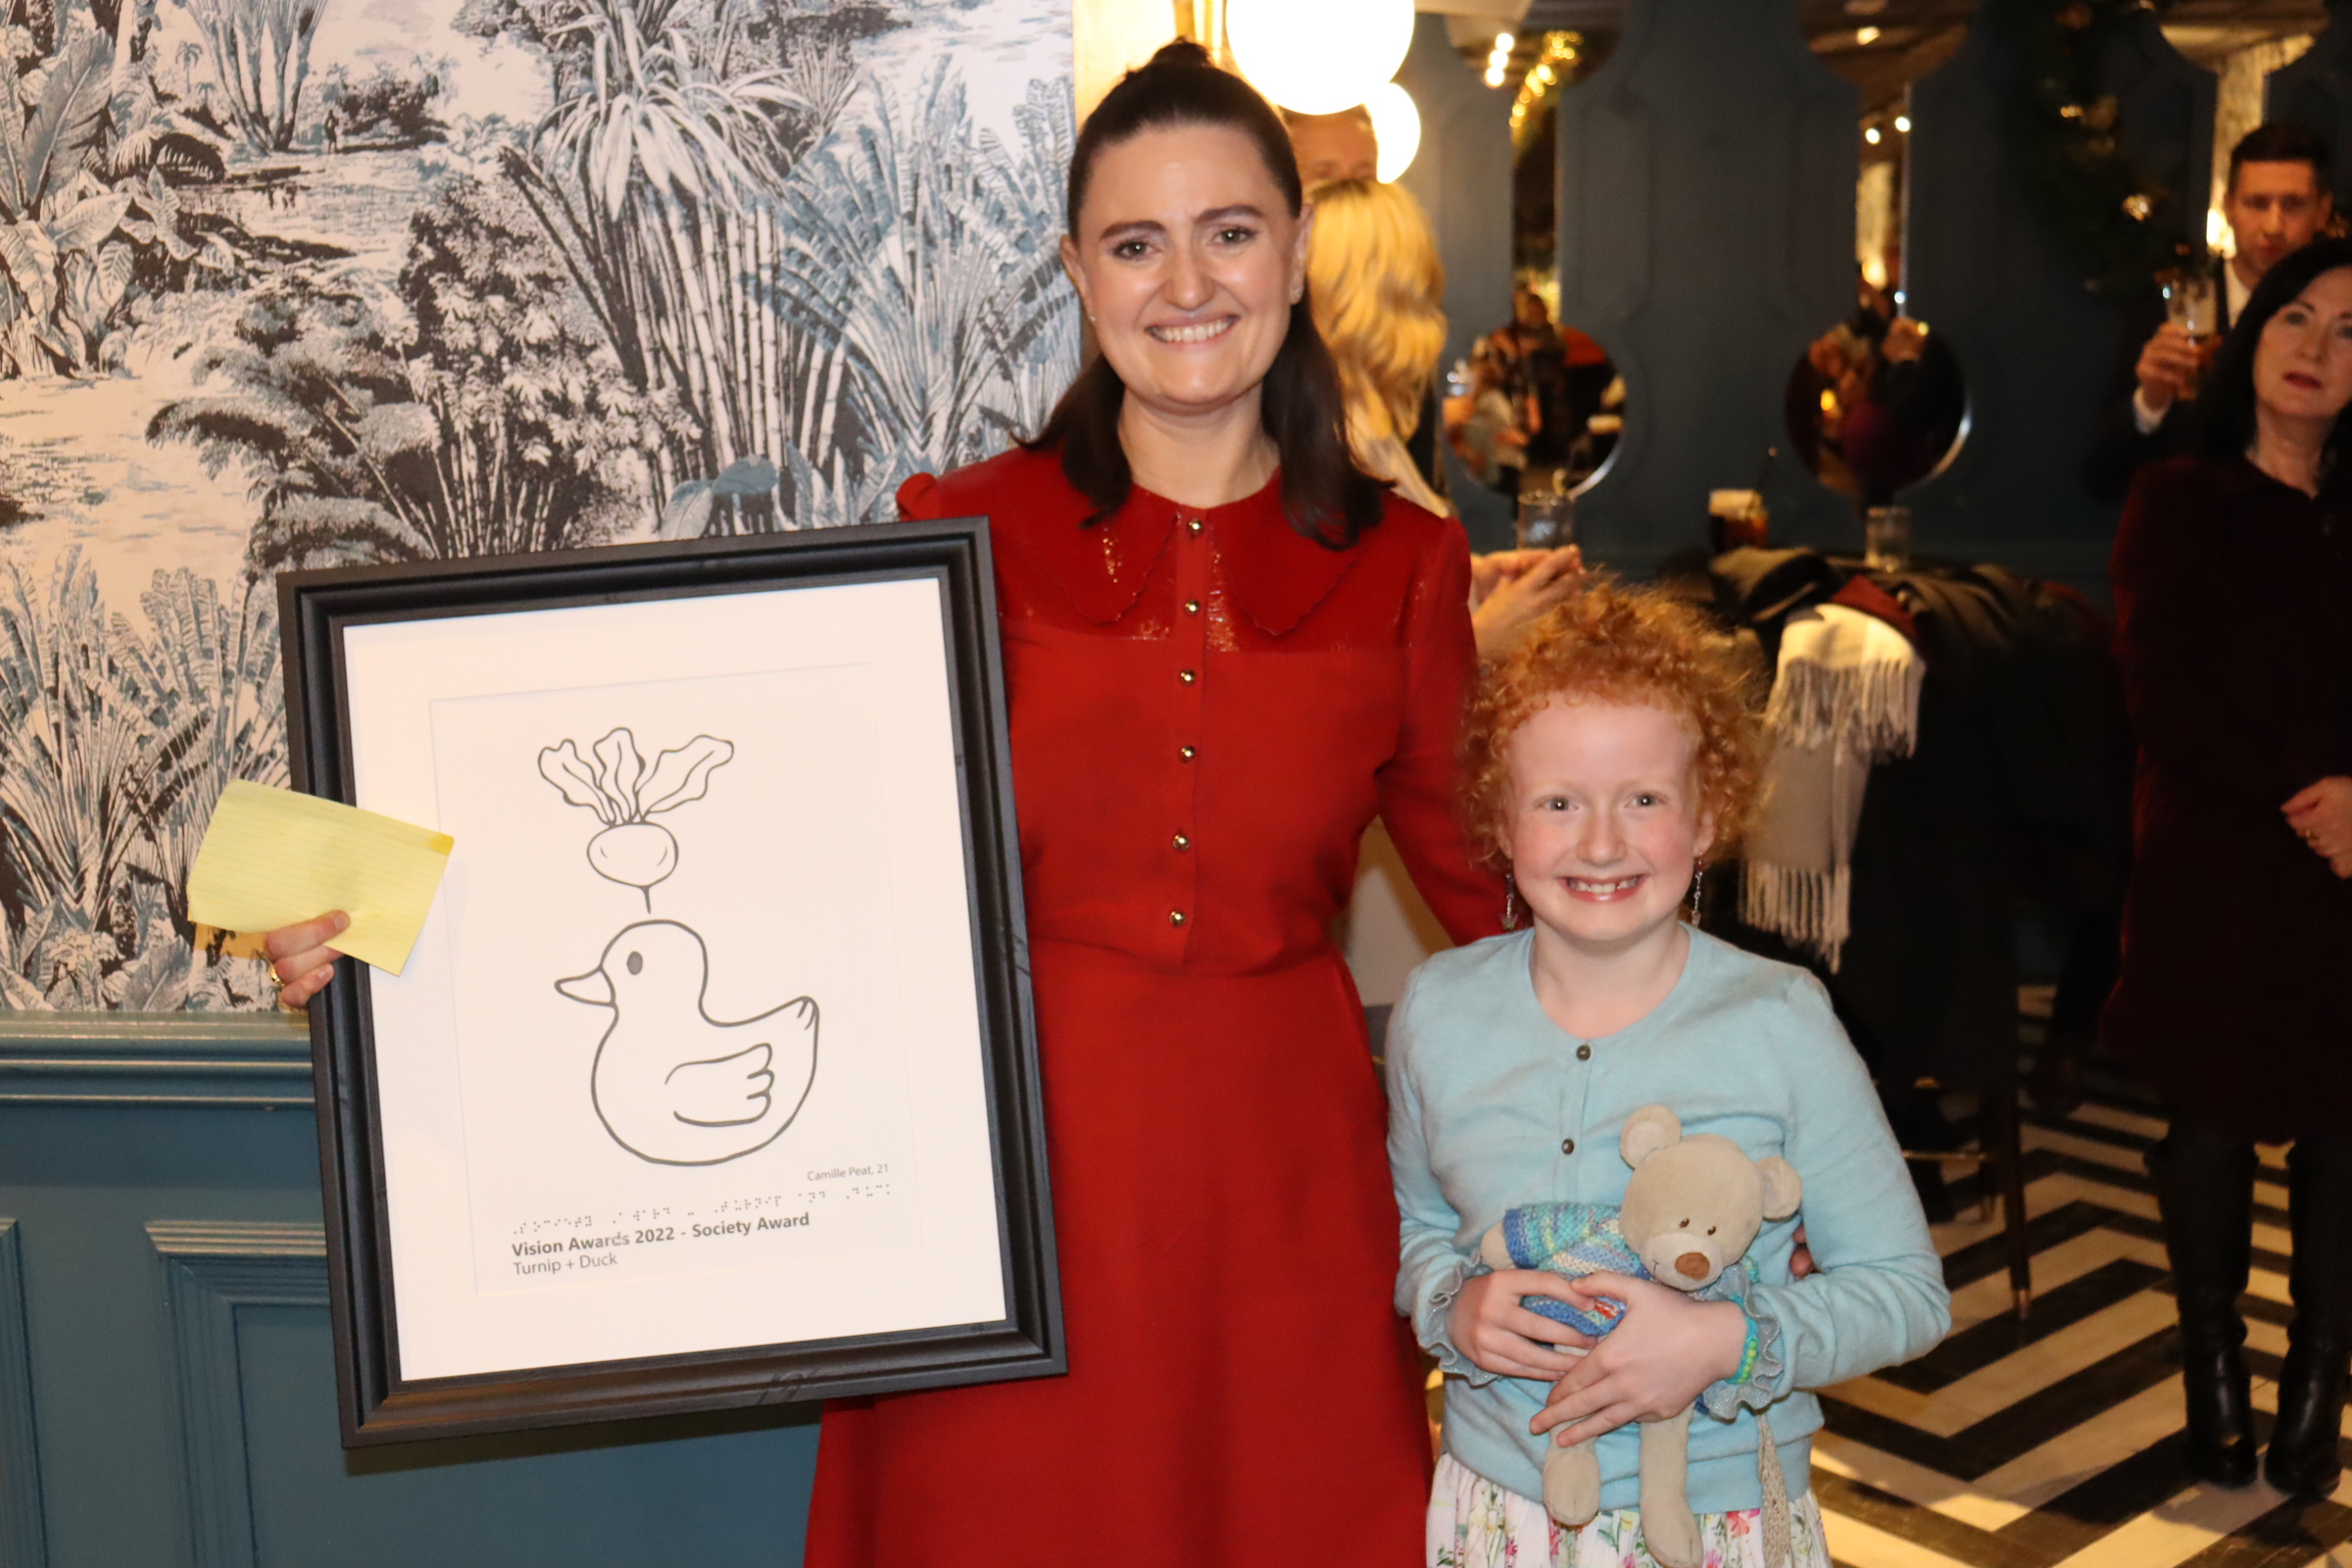 Society Award accepted by Bonnie O’Meara and Laura Cannivan Hayes for their work on a children's cartoon which has blind and vision impaired characters